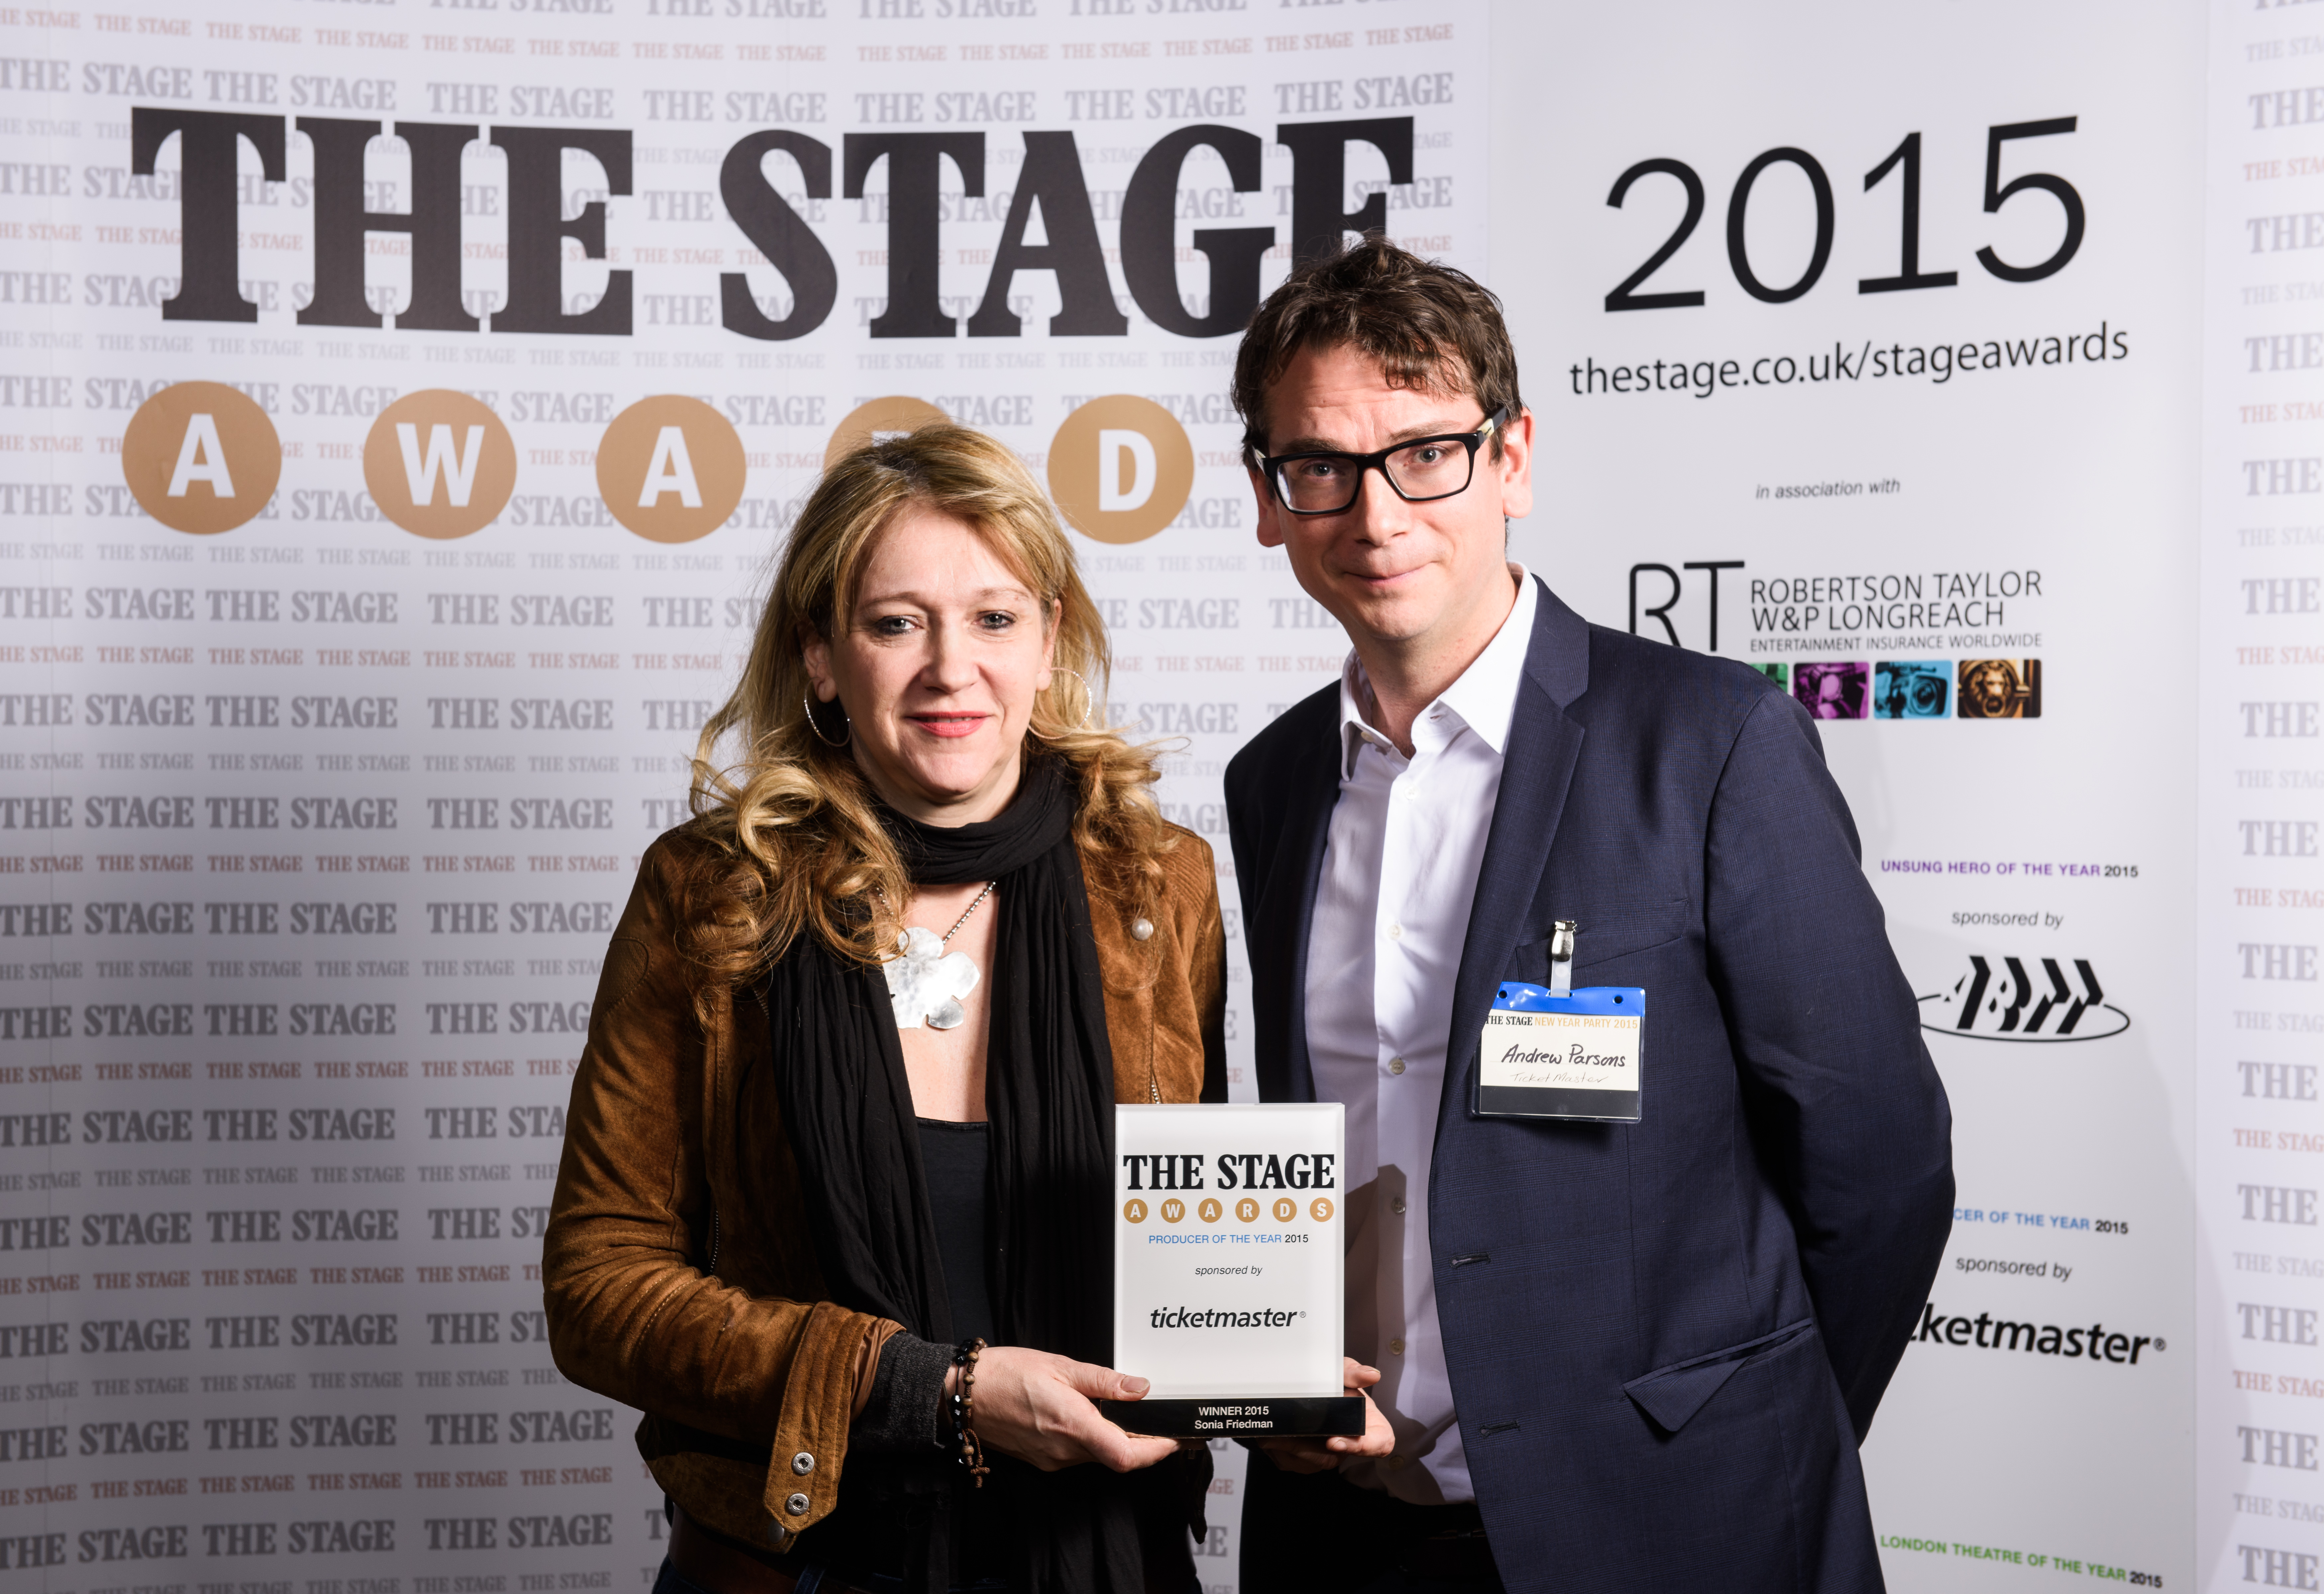 The 2015 Stage Awards